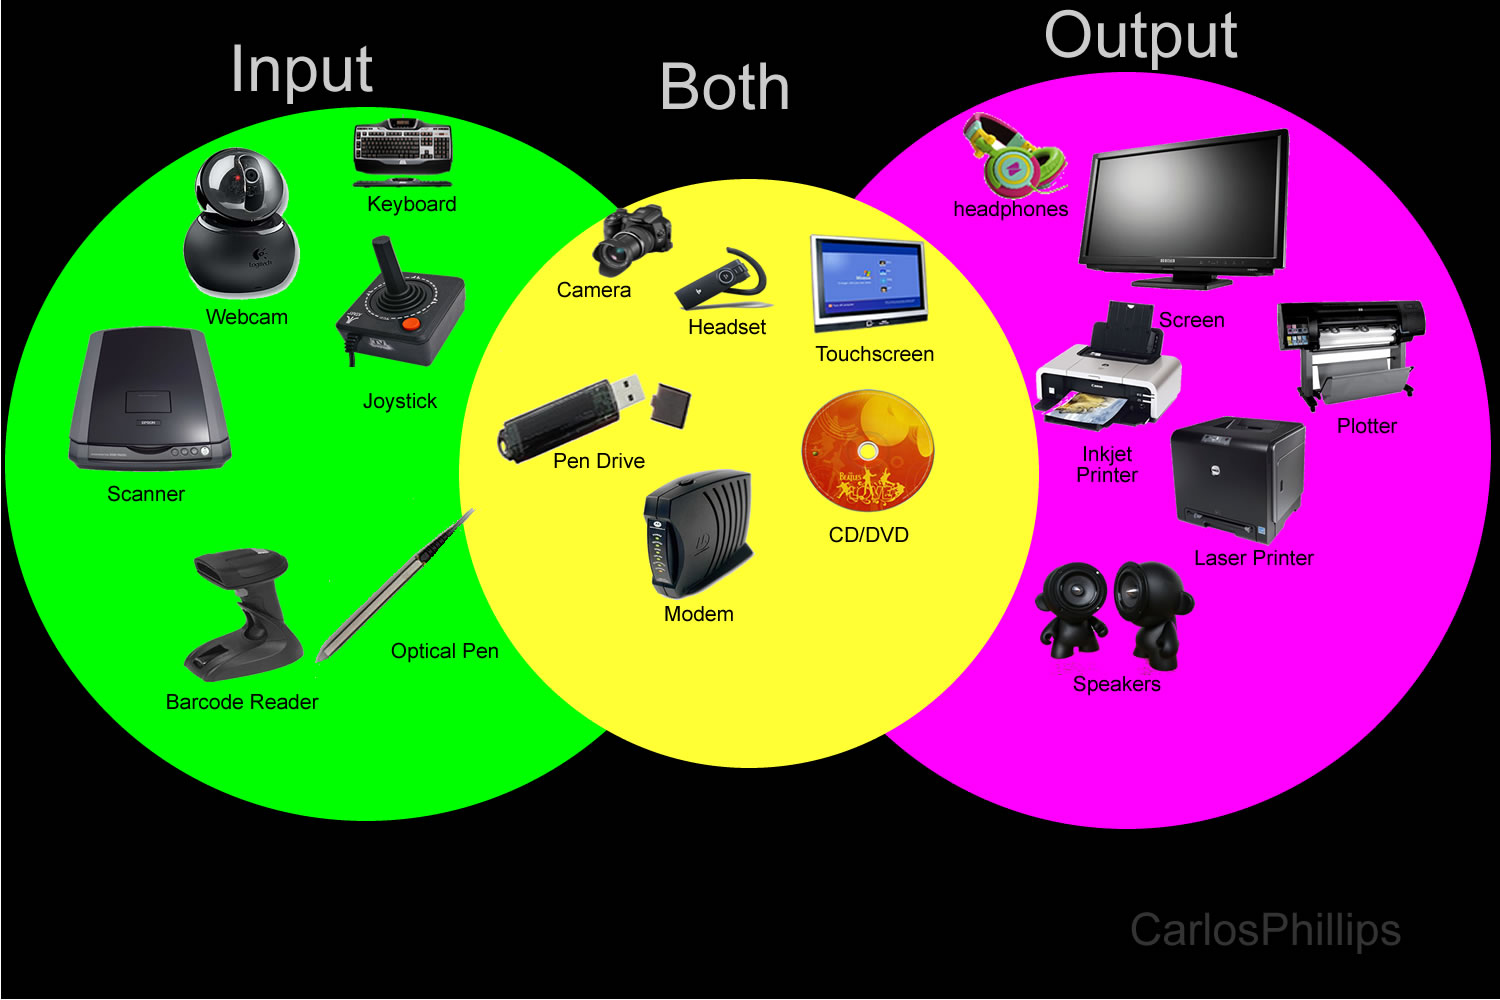 What are input and output devices?